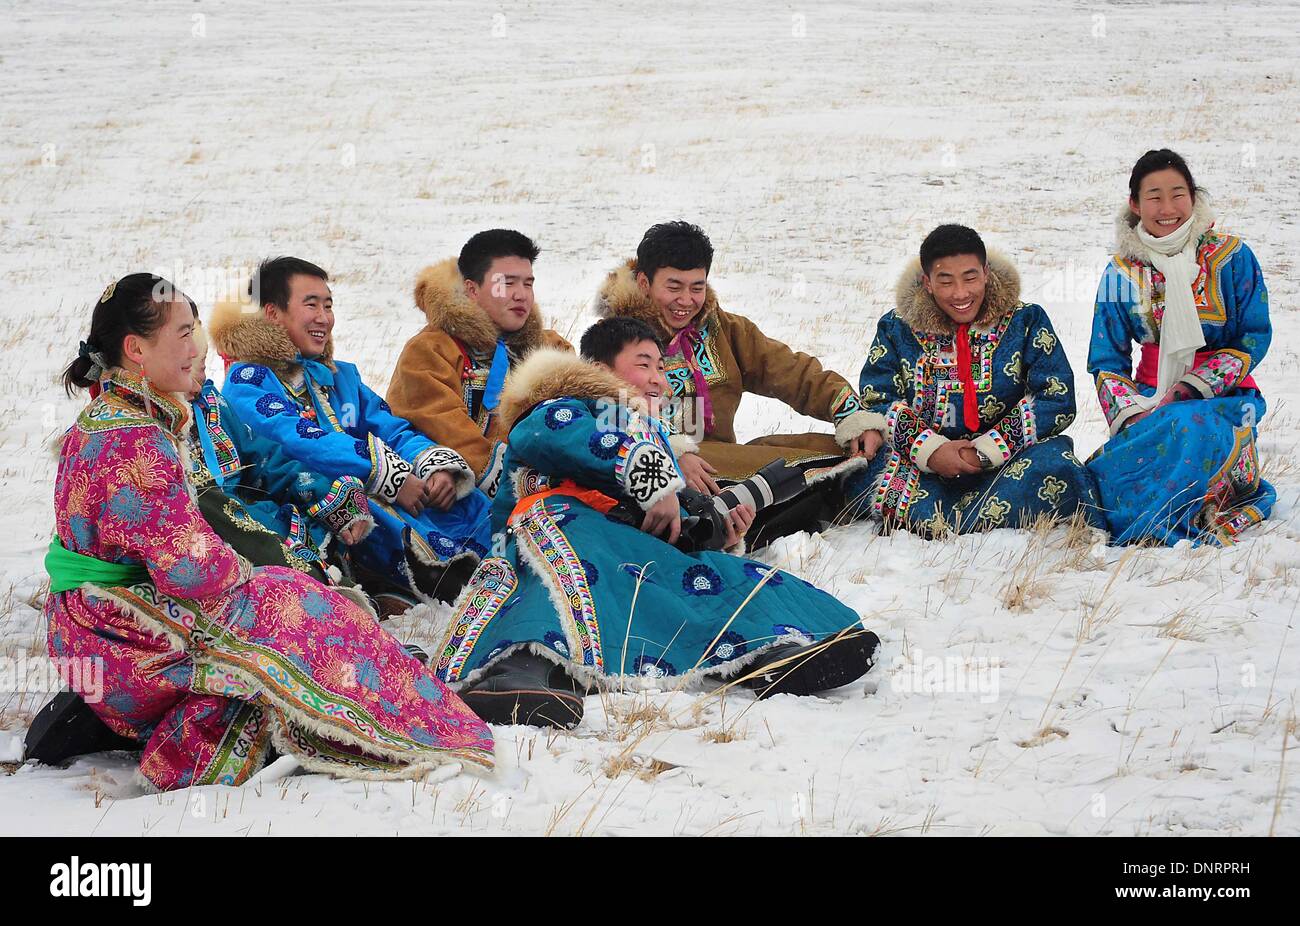 West Ujimqin Banner, China's Inner Mongolia Autonomous Region. 4th Jan, 2014. Young men and women in traditional holiday attire of the Mongolian ethnic group play on the snowfield at an ice and snow carnival in West Ujimqin Banner, north China's Inner Mongolia Autonomous Region, Jan. 4, 2014. The winter carnival lasts from Jan. 4 to Jan. 5 here. Credit:  Wang Song/Xinhua/Alamy Live News Stock Photo